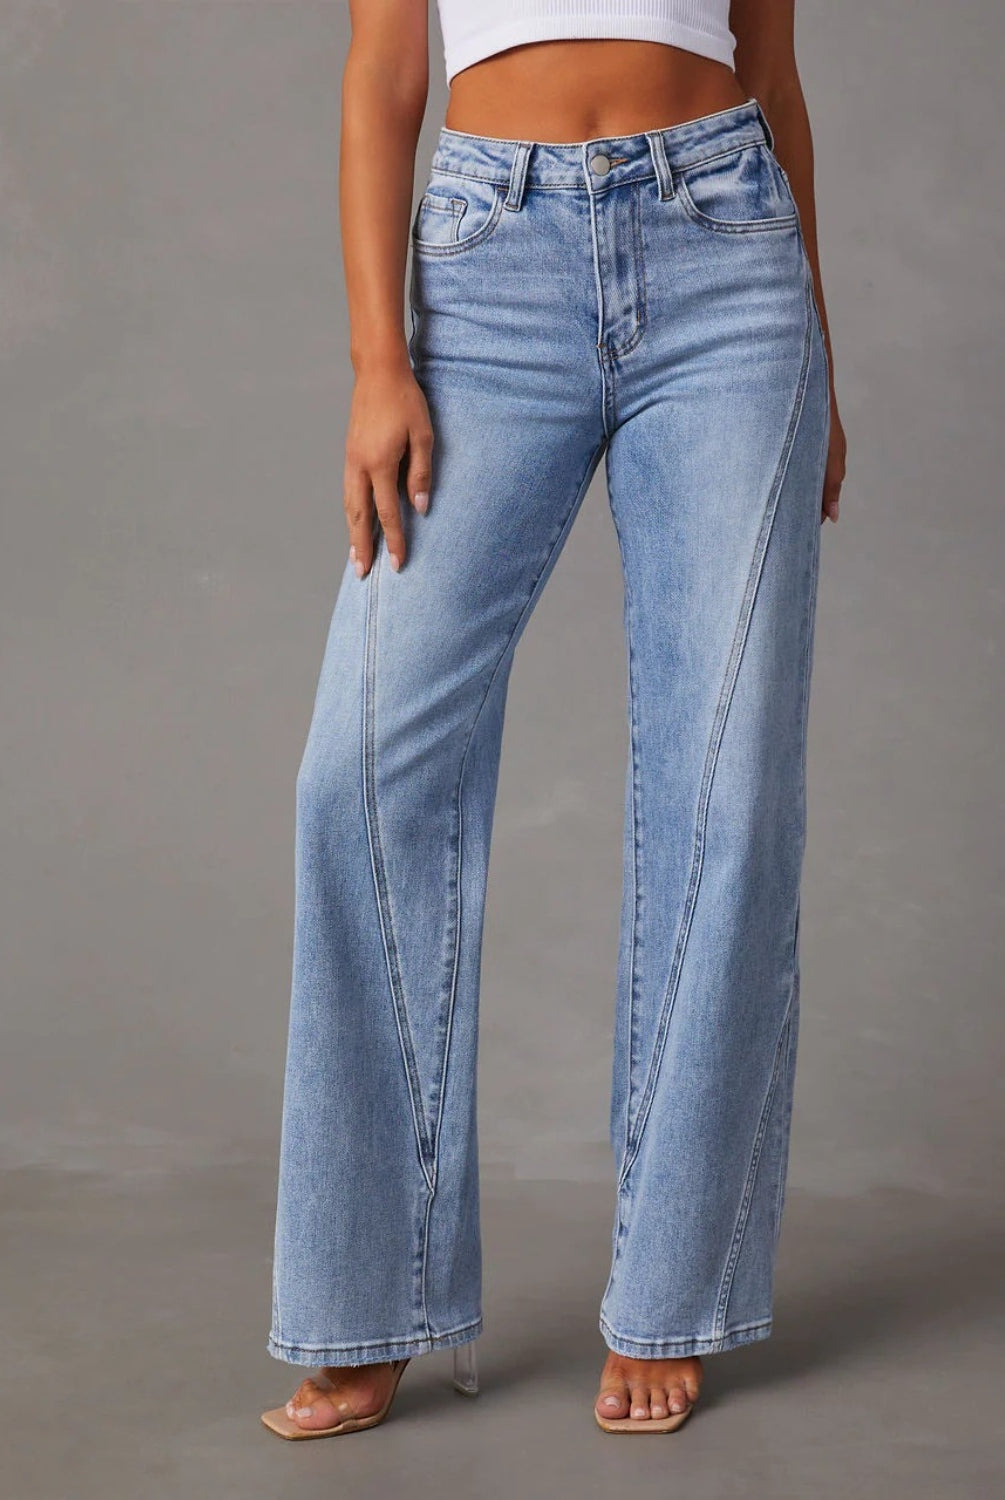 A model showcases Classic High-Waist Straight-Leg Jeans in a light blue wash, complementing the look with a cropped white top and minimalist open-toe heels for an understated yet chic appearance.